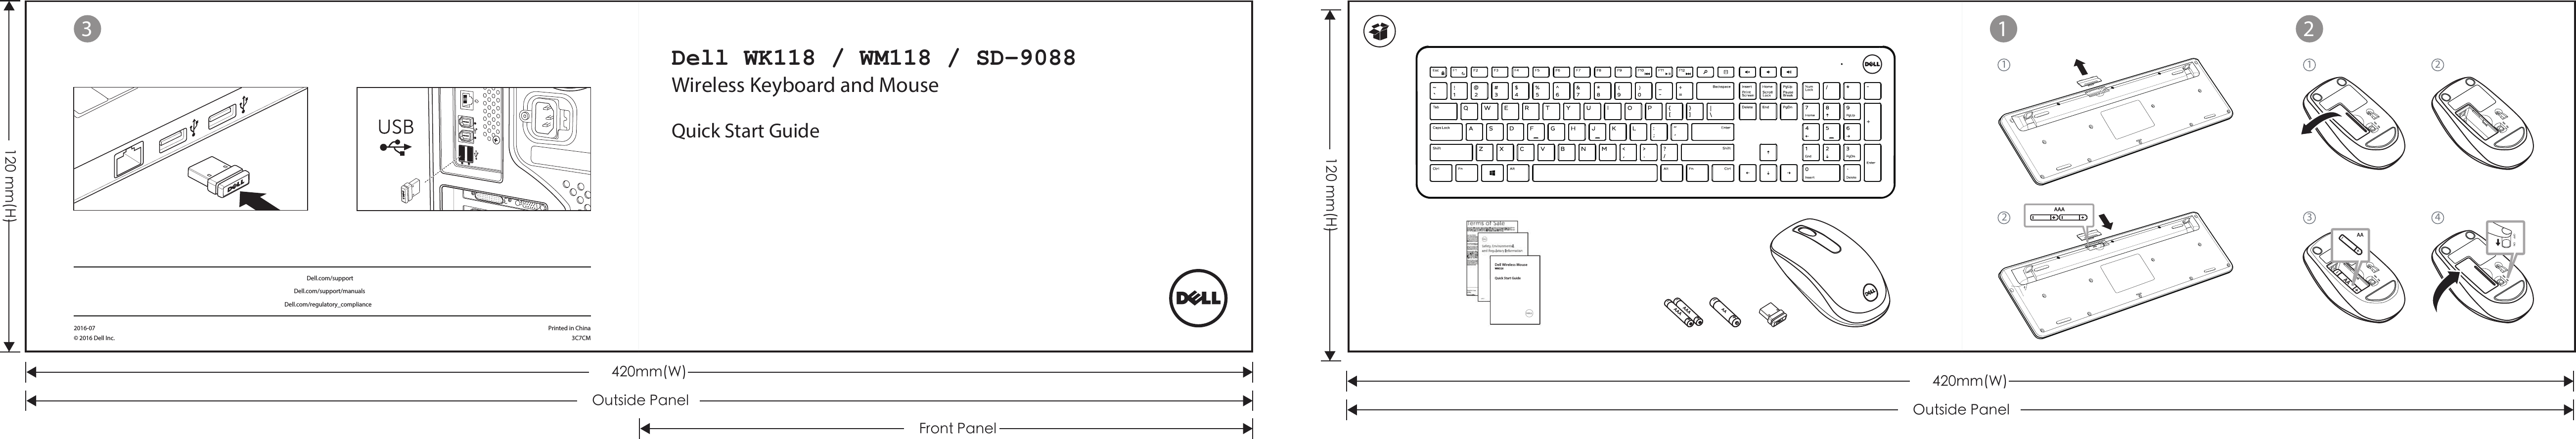 1 2121 23 4OFF     ONQuick Start GuideWM326Dell Wireless MouseDell WK118 / WM118 / SD-9088Wireless Keyboard and MouseQuick Start Guide2016-07© 2016 Dell Inc.Printed in China3C7CMDell.com/supportDell.com/support/manualsDell.com/regulatory_compliance3120 mm(H)420mm(W)Outside PanelFront Panel120 mm(H)420mm(W)Outside Panel